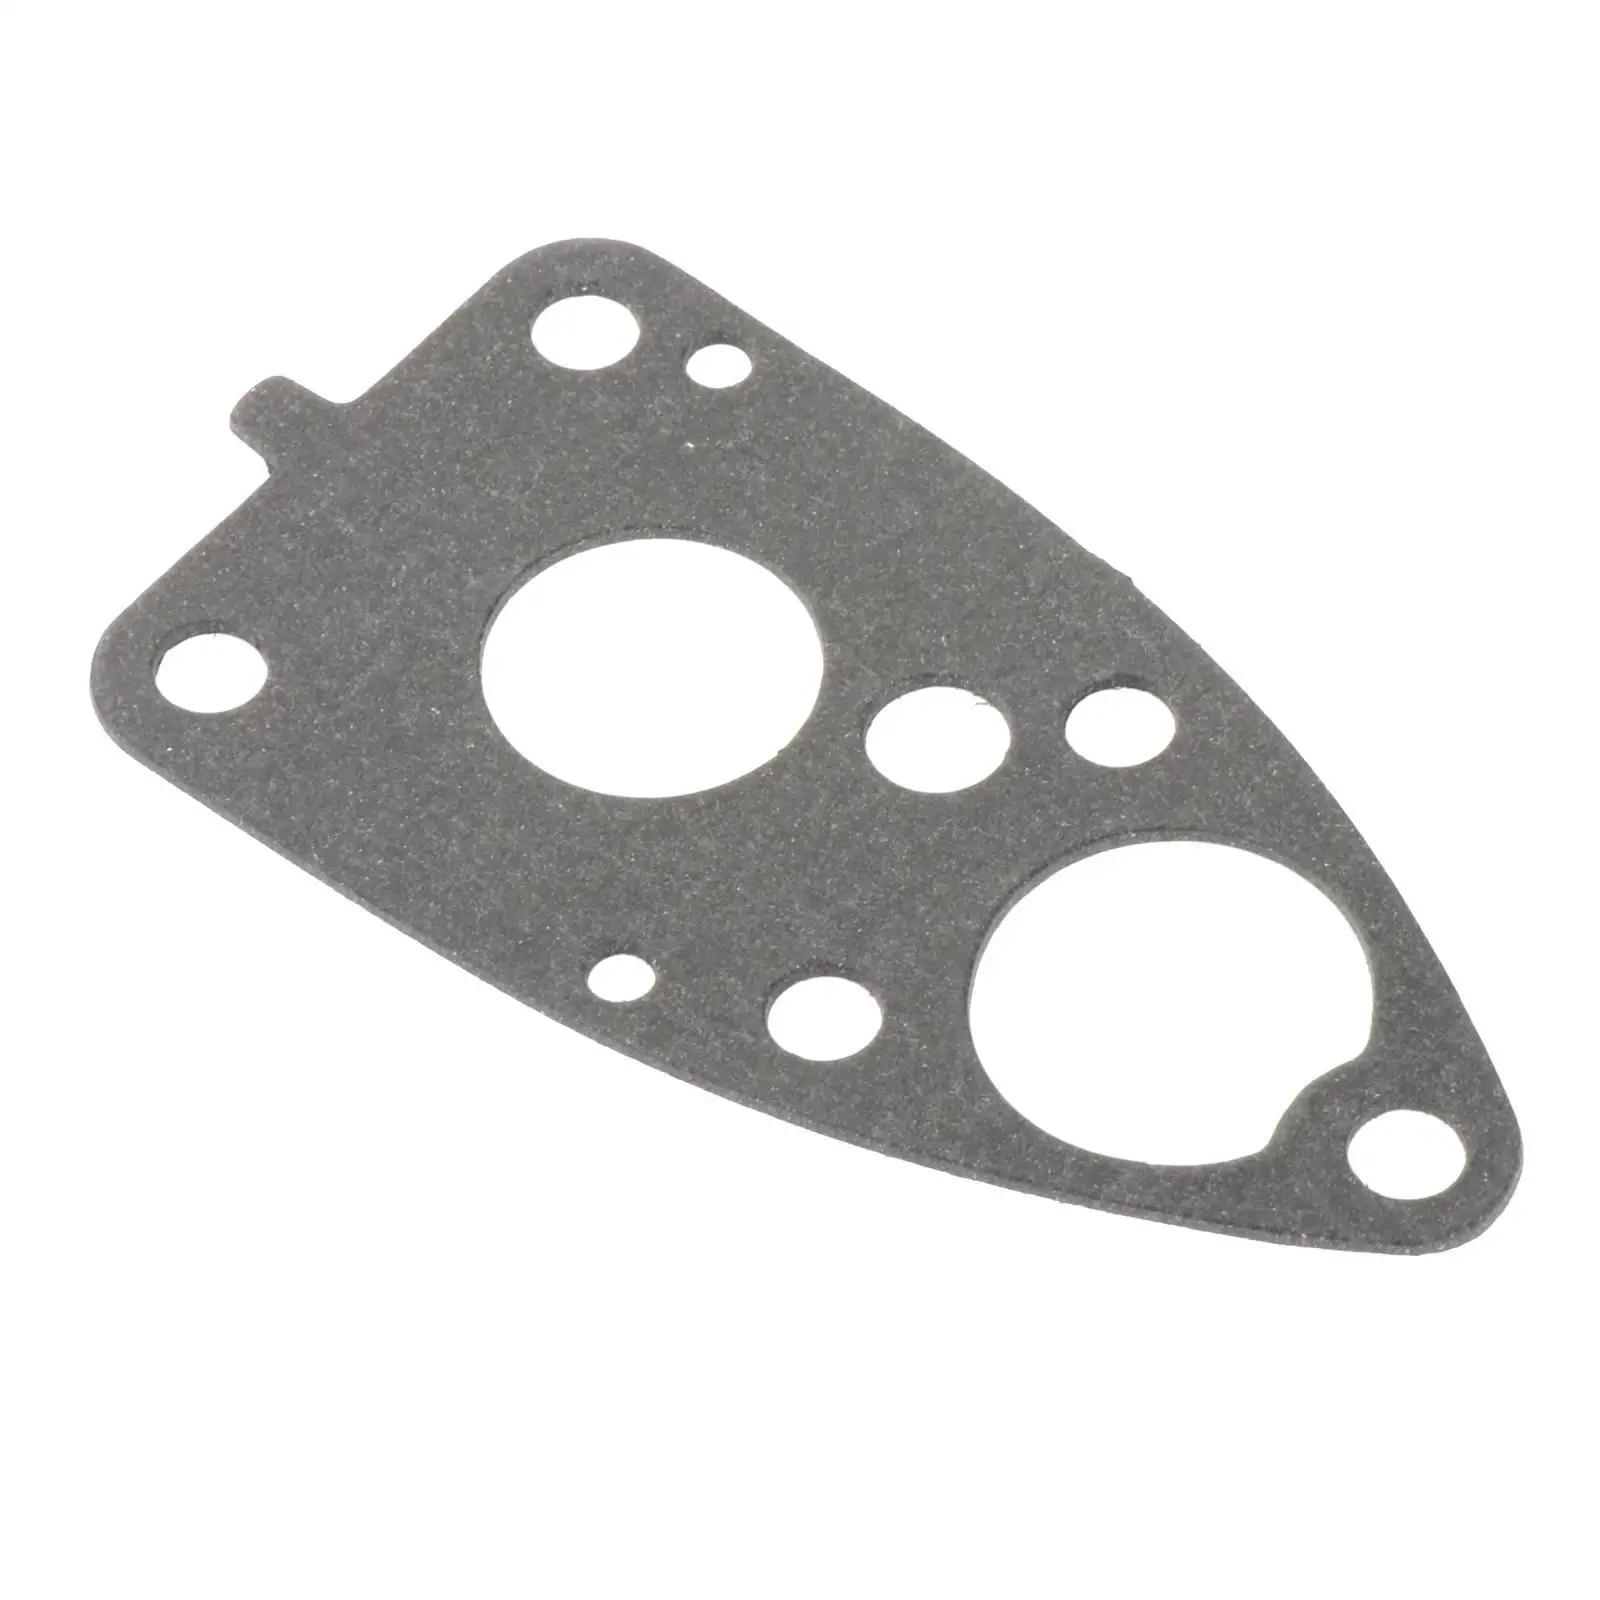 Packing Lower Case, Supplies Silver Lower Gear Case Plate Gasket Fit for Yamaha F4A 4A 4B 5C 6E0-45315-A0-00 Outboard Engine